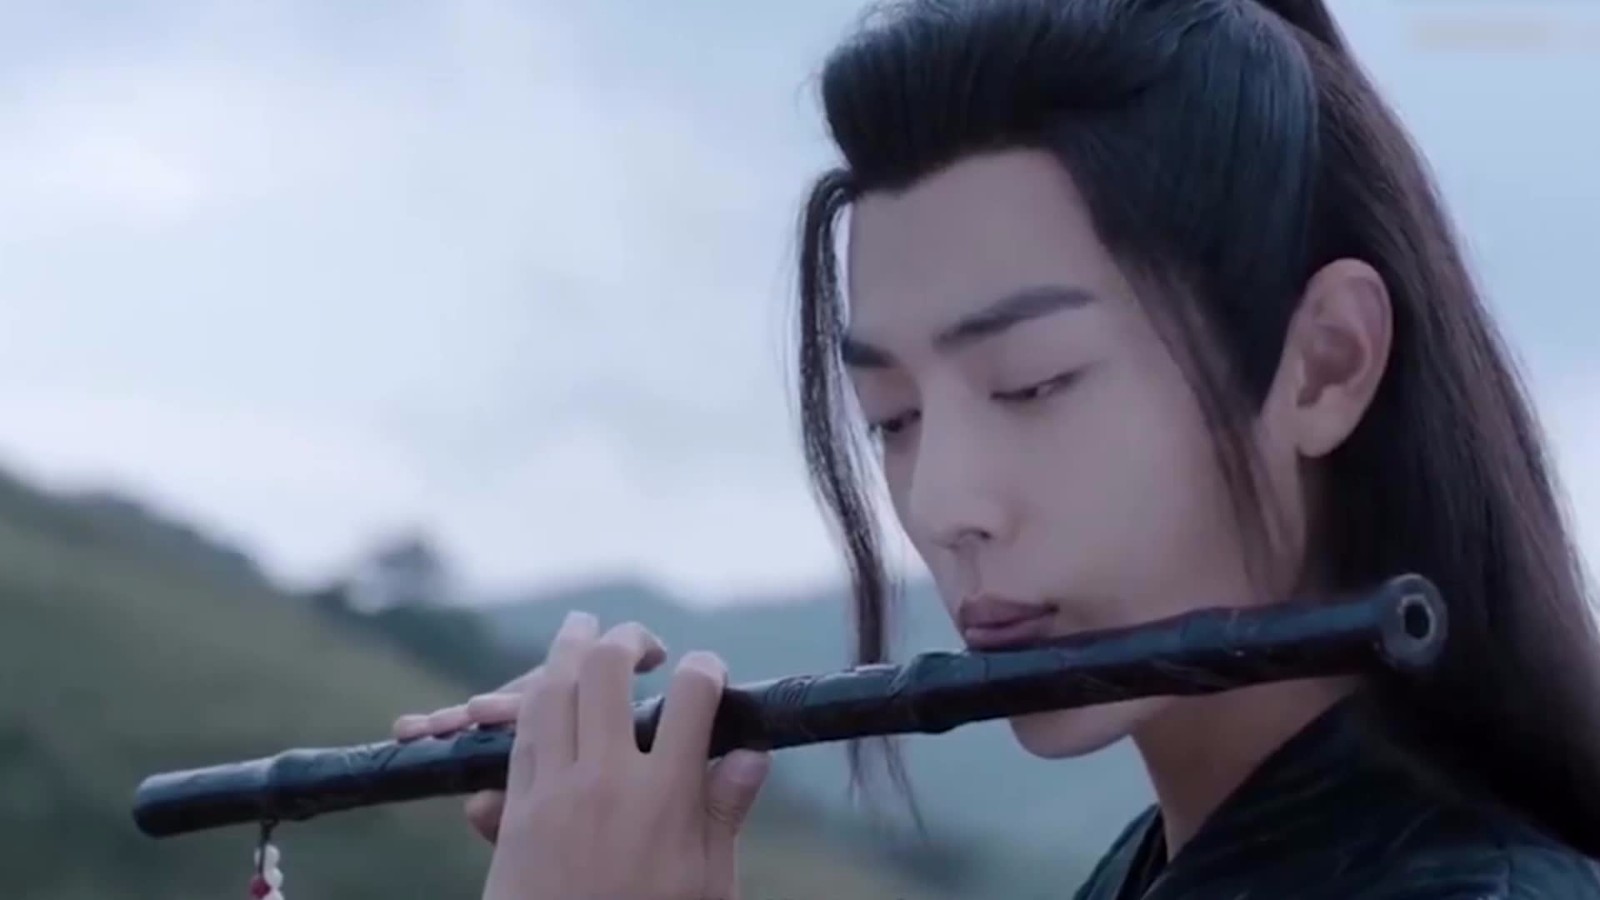 The ending of Chen Qingling, Lan Zhan: How can you let you go easily after 16 years of searching for you?